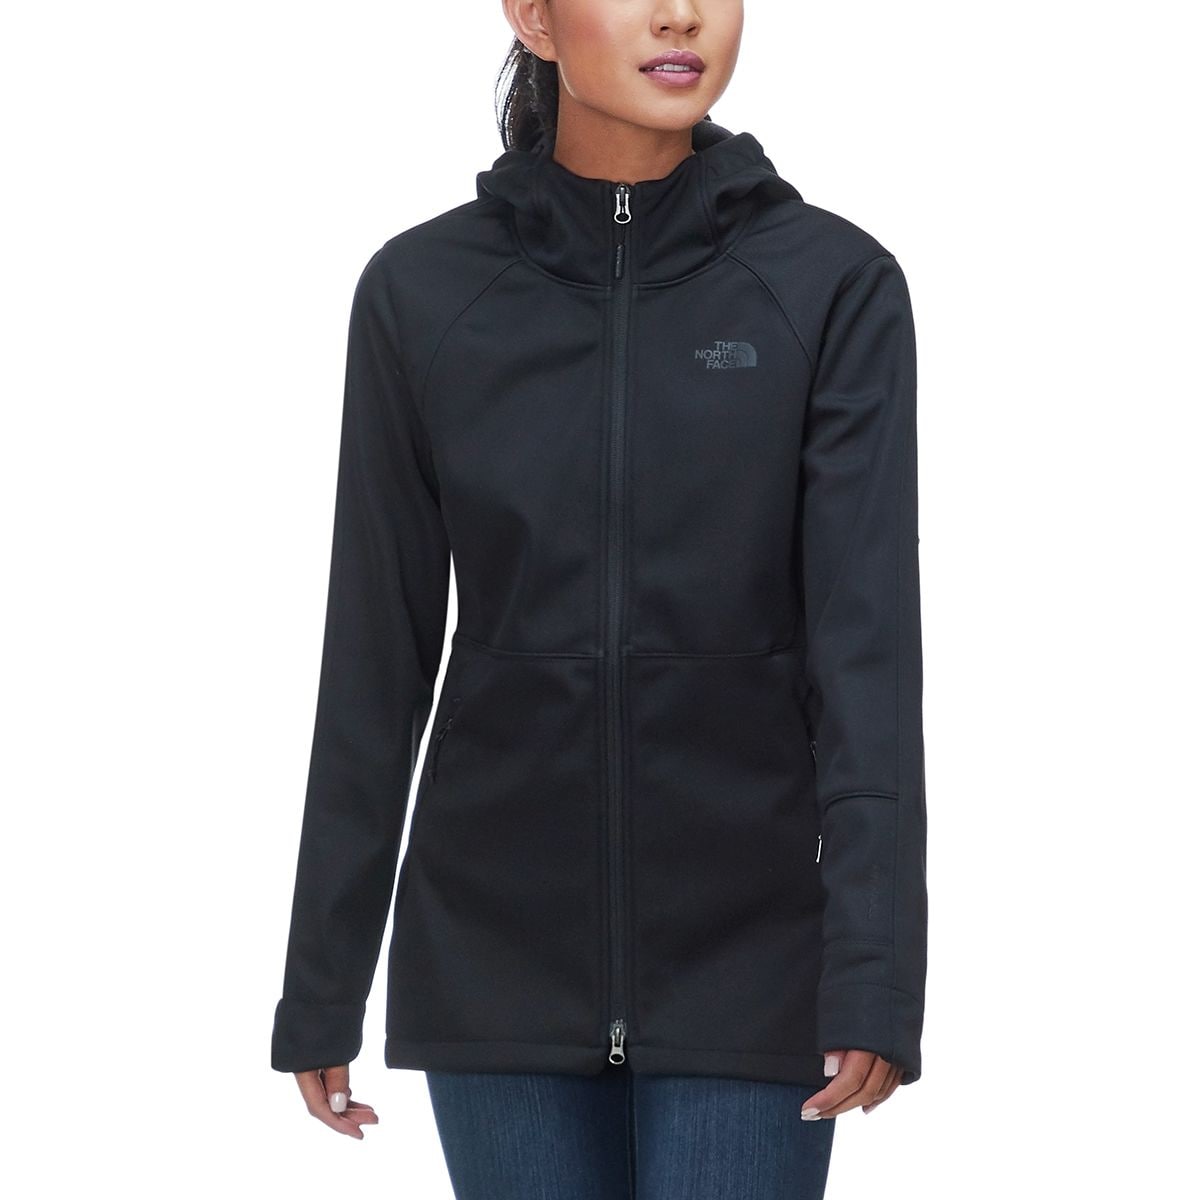 the north face women's apex risor hoodie